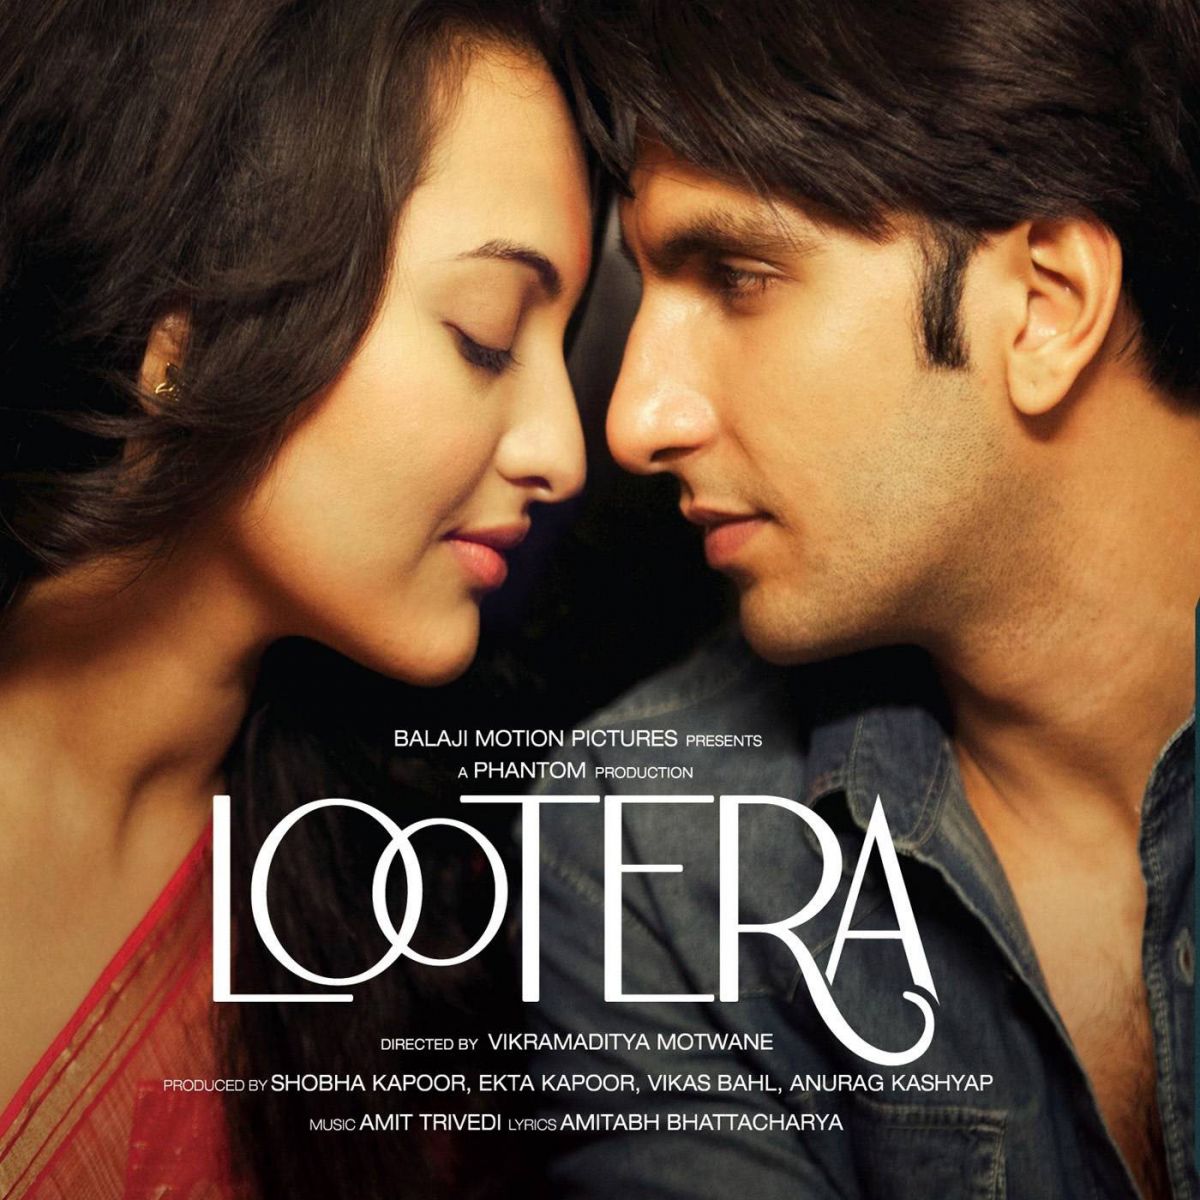 Lootera Cover Art HD Bollywood Movies Wallpaper For Mobile And